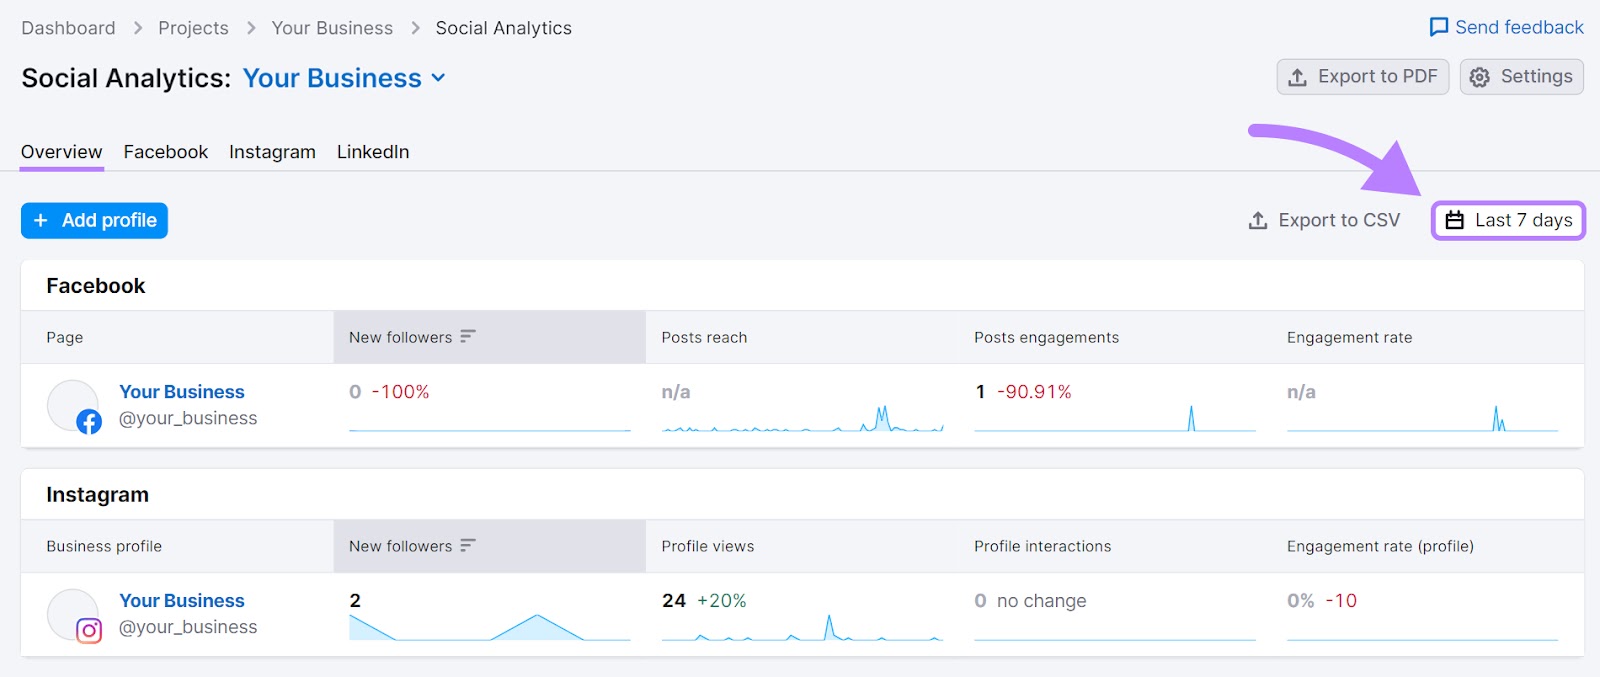 Social Analytics overview dashboard showing data for the last 7 days